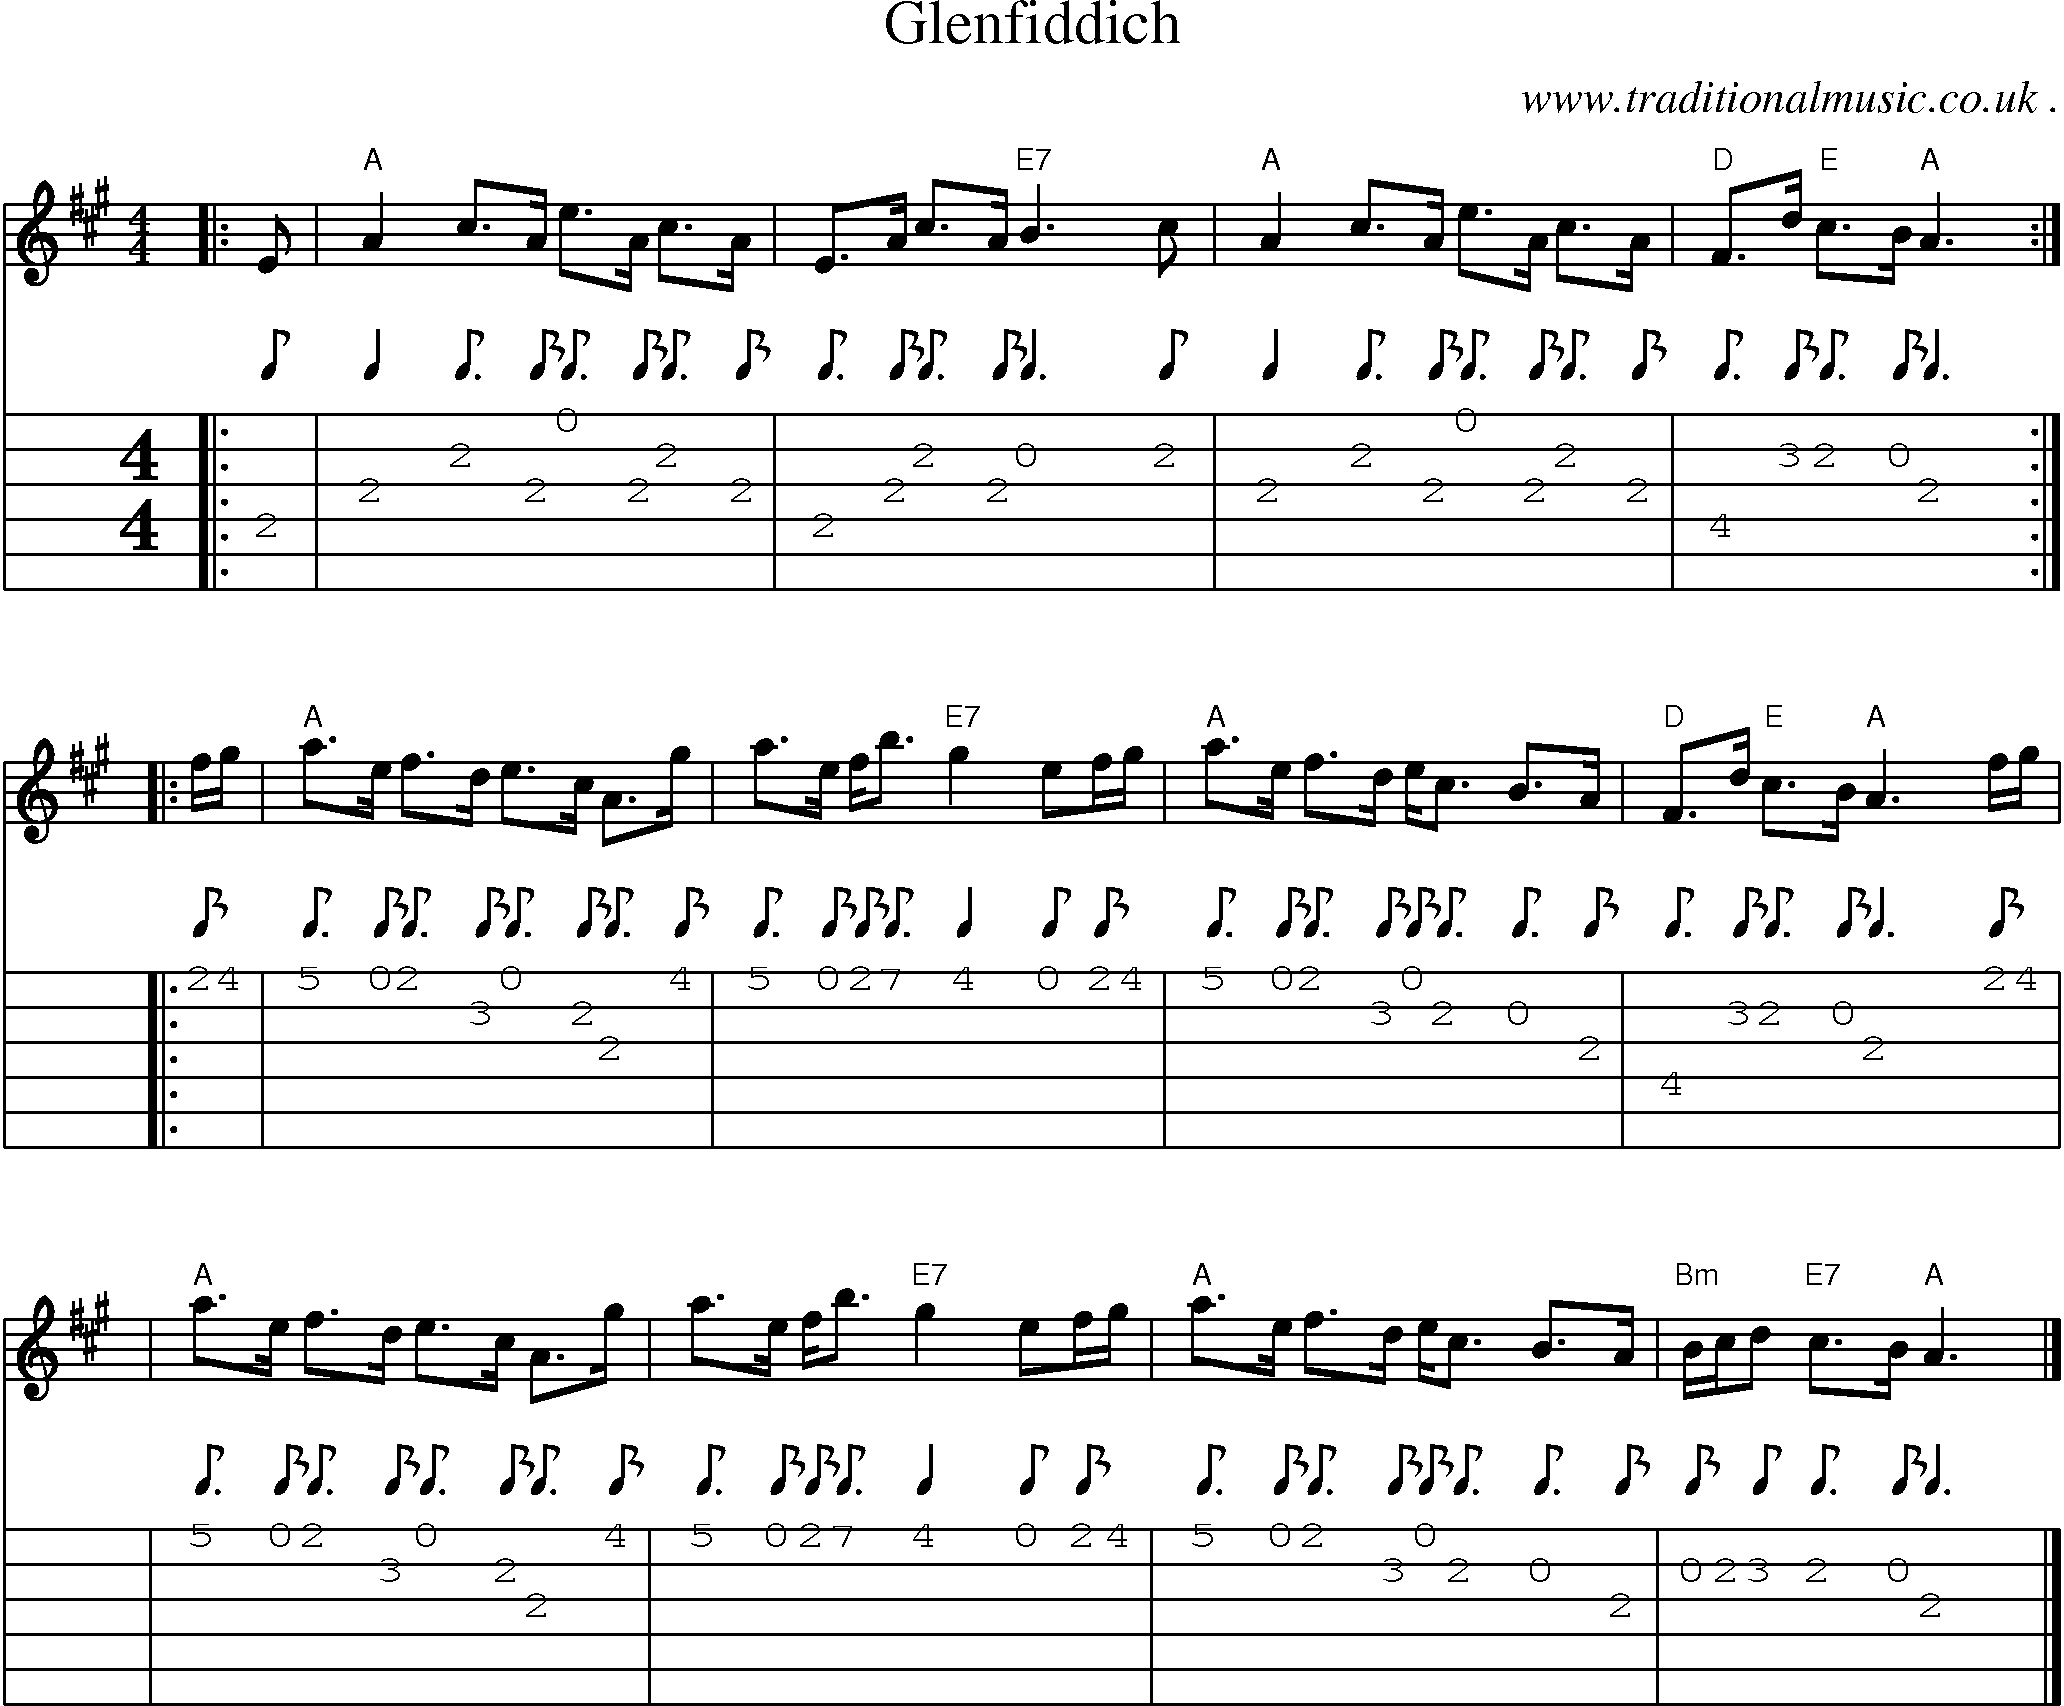 Sheet-music  score, Chords and Guitar Tabs for Glenfiddich